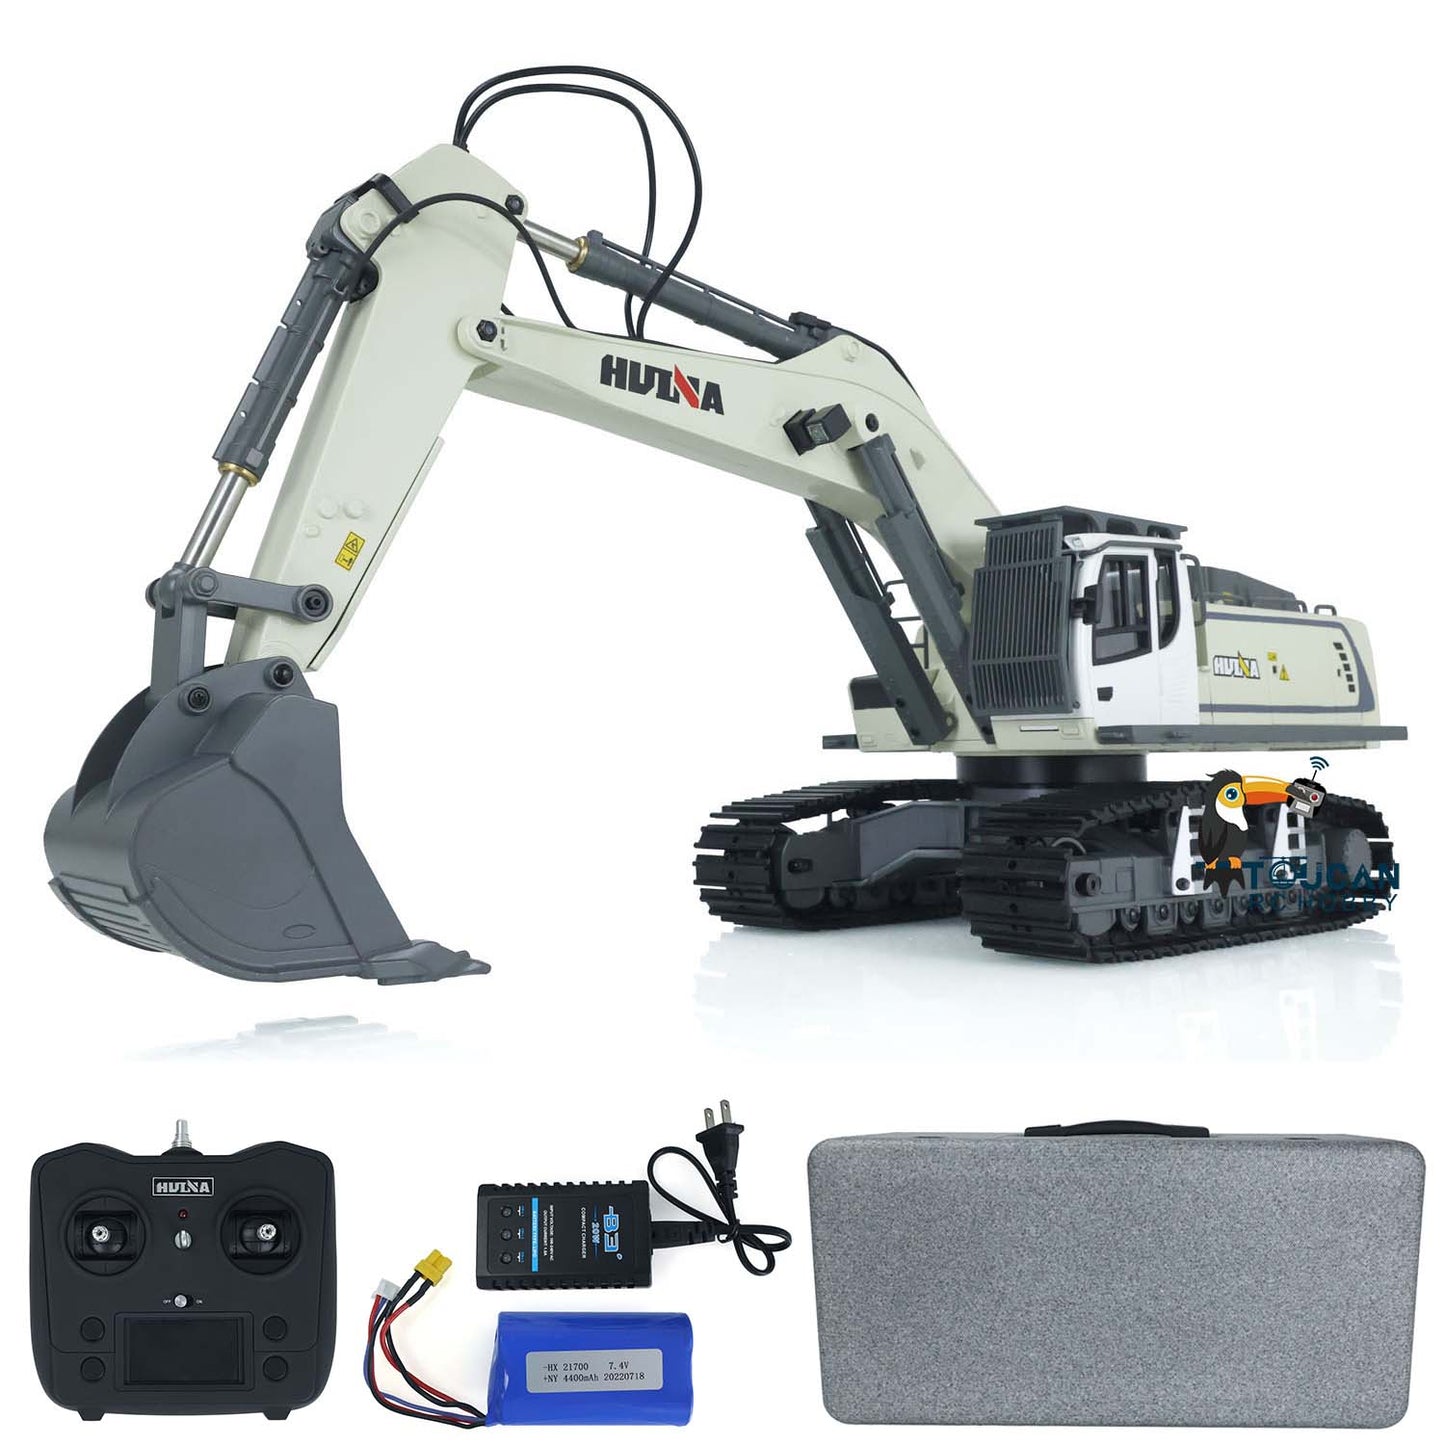 HUINA 1/14 Metal Assembled Painted RC Excavator 599 RTR Remote Control Digger Hobby Model Toys Lights 2.4G Radio